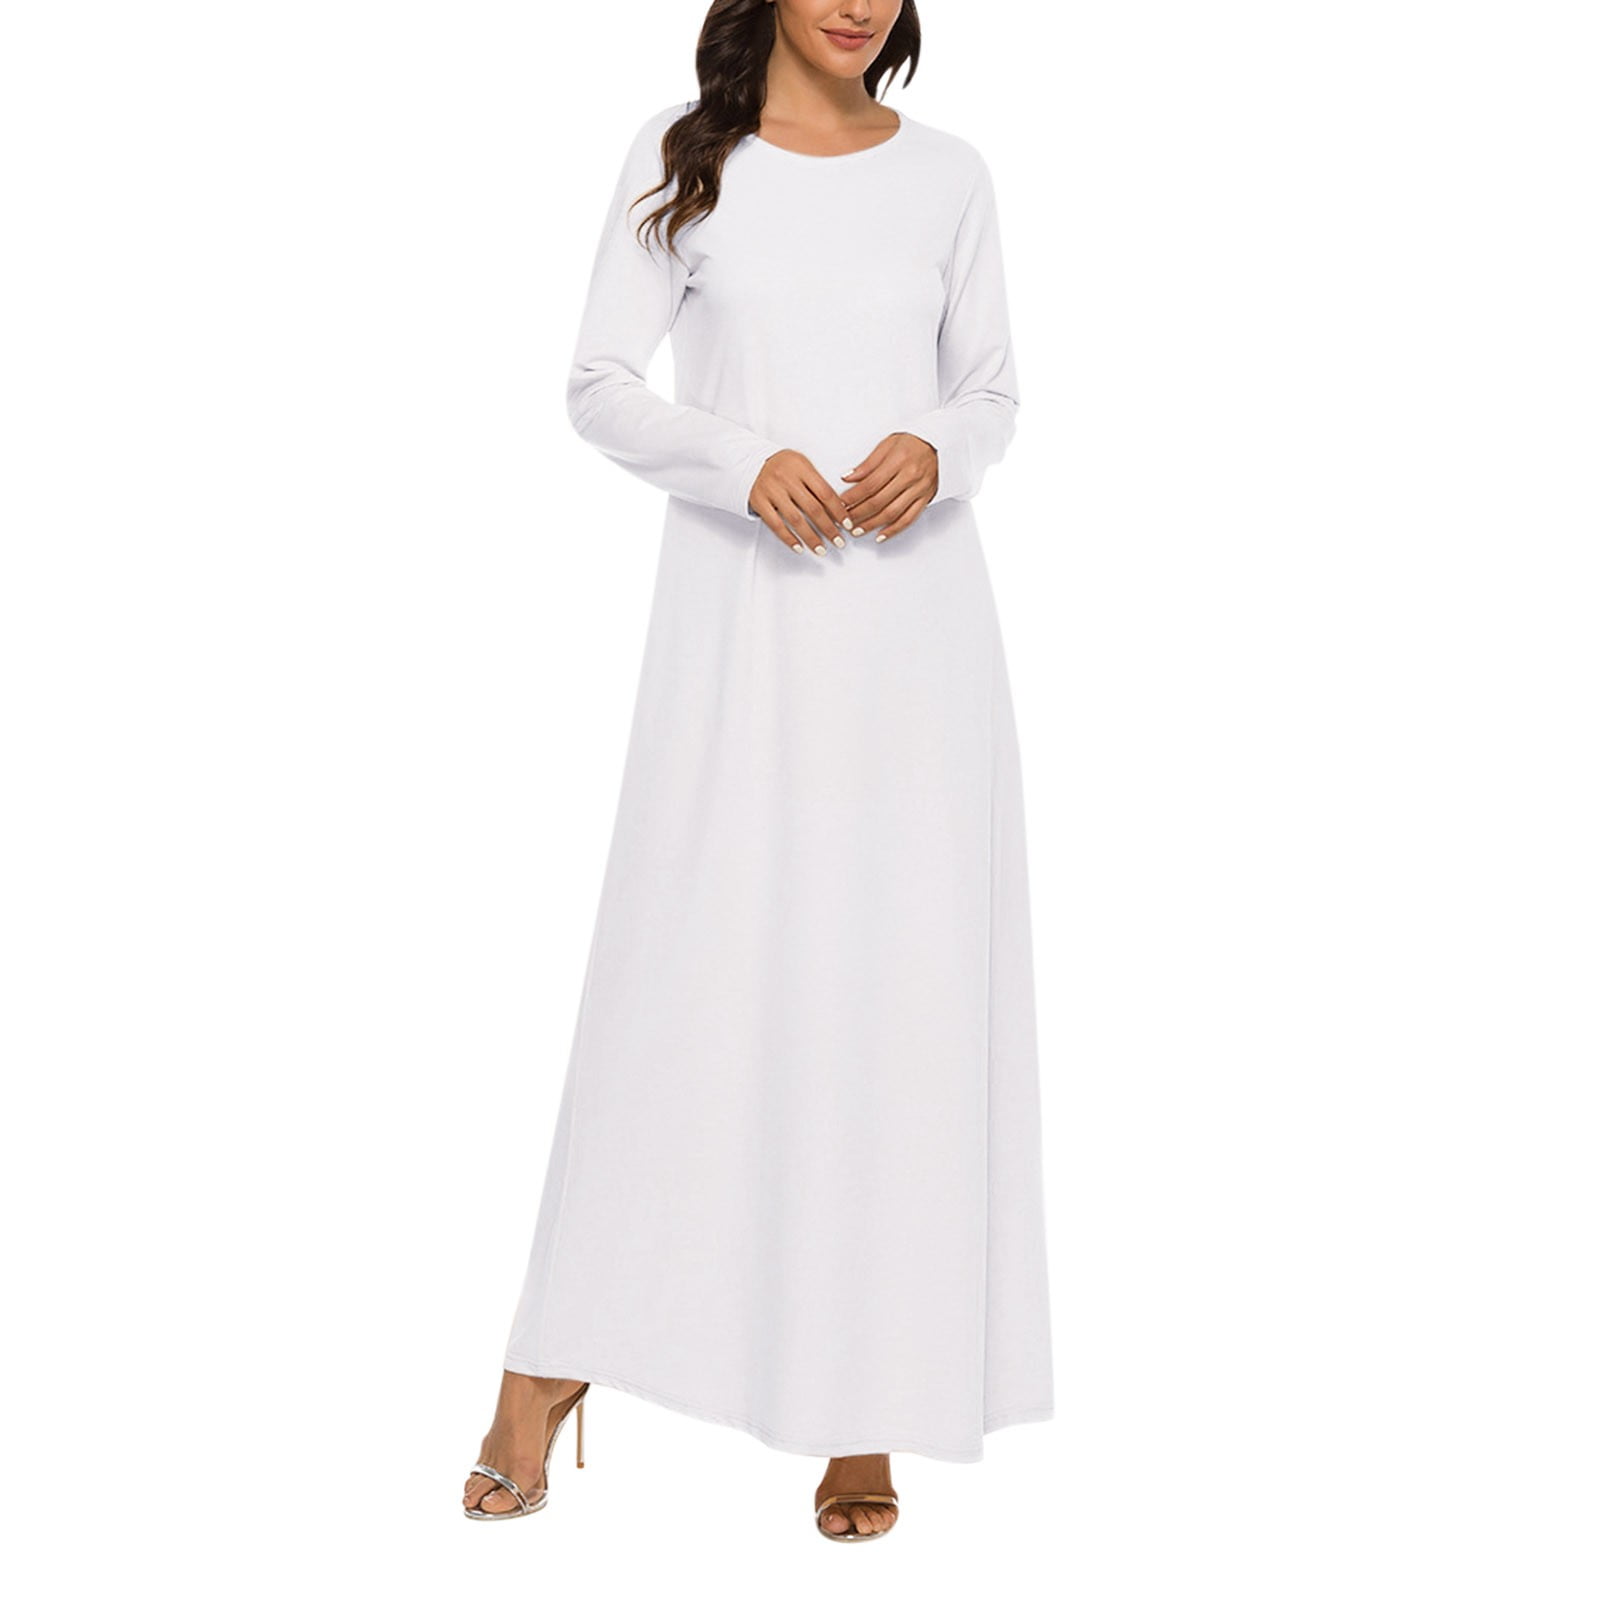 White Dresses For Graduation Womens Casual Solid Dress Abaya Long ...